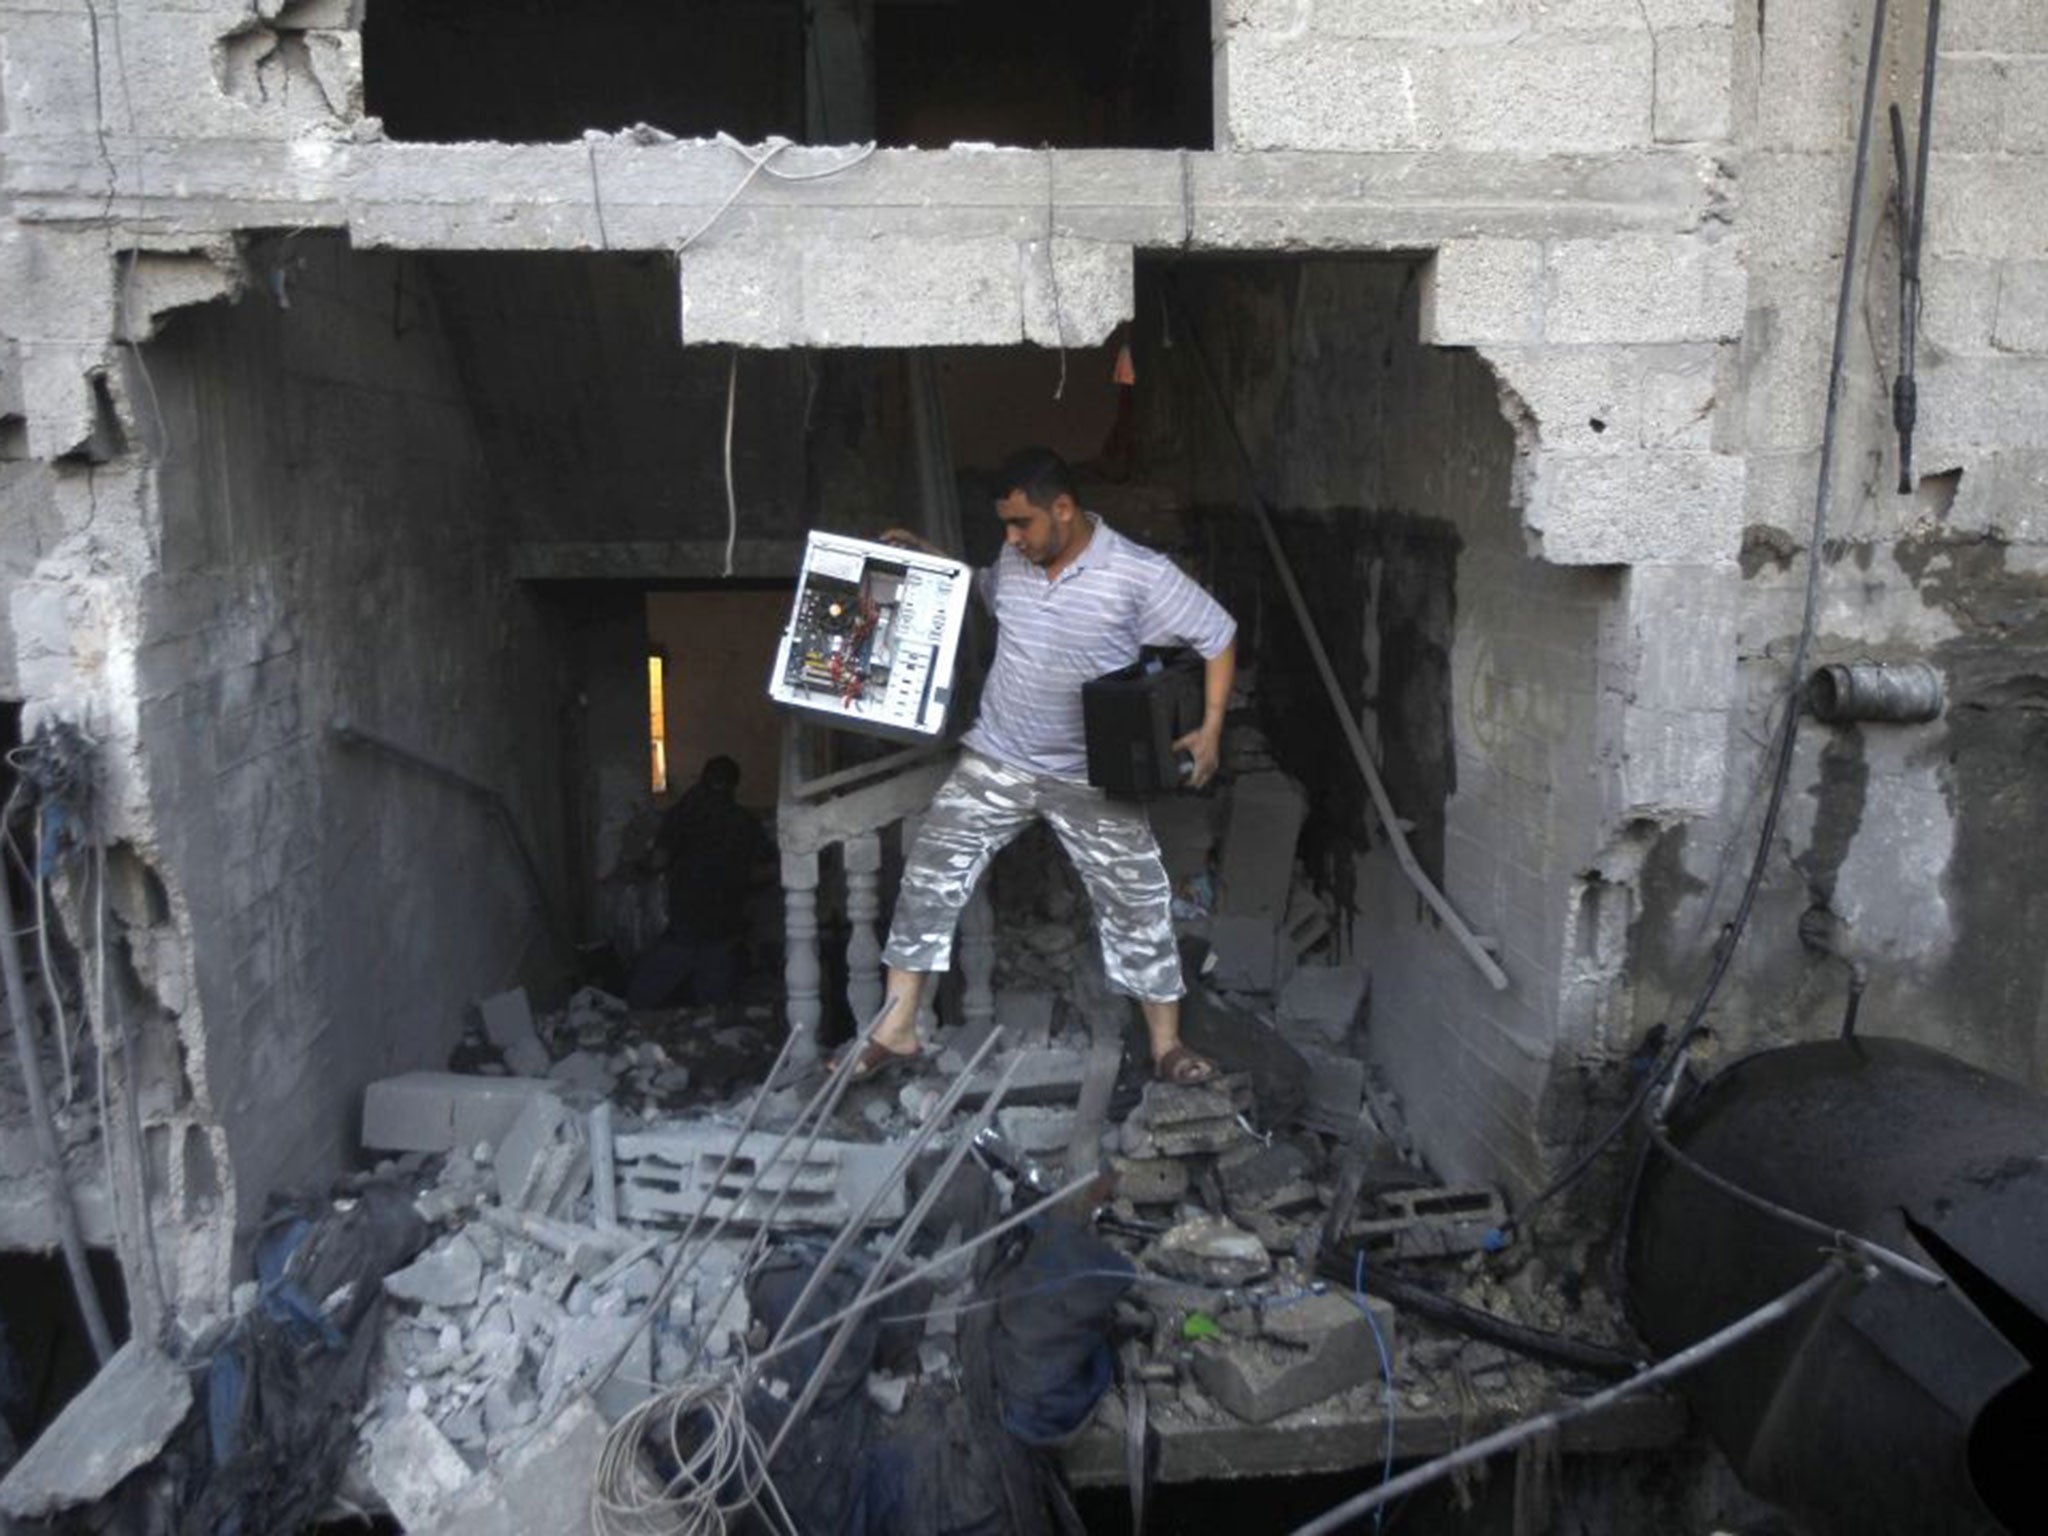 A Palestinian man removes a computer from the rubble of the Ghanam family home after it was targeted in an air raid on Rafah on 11 July 11